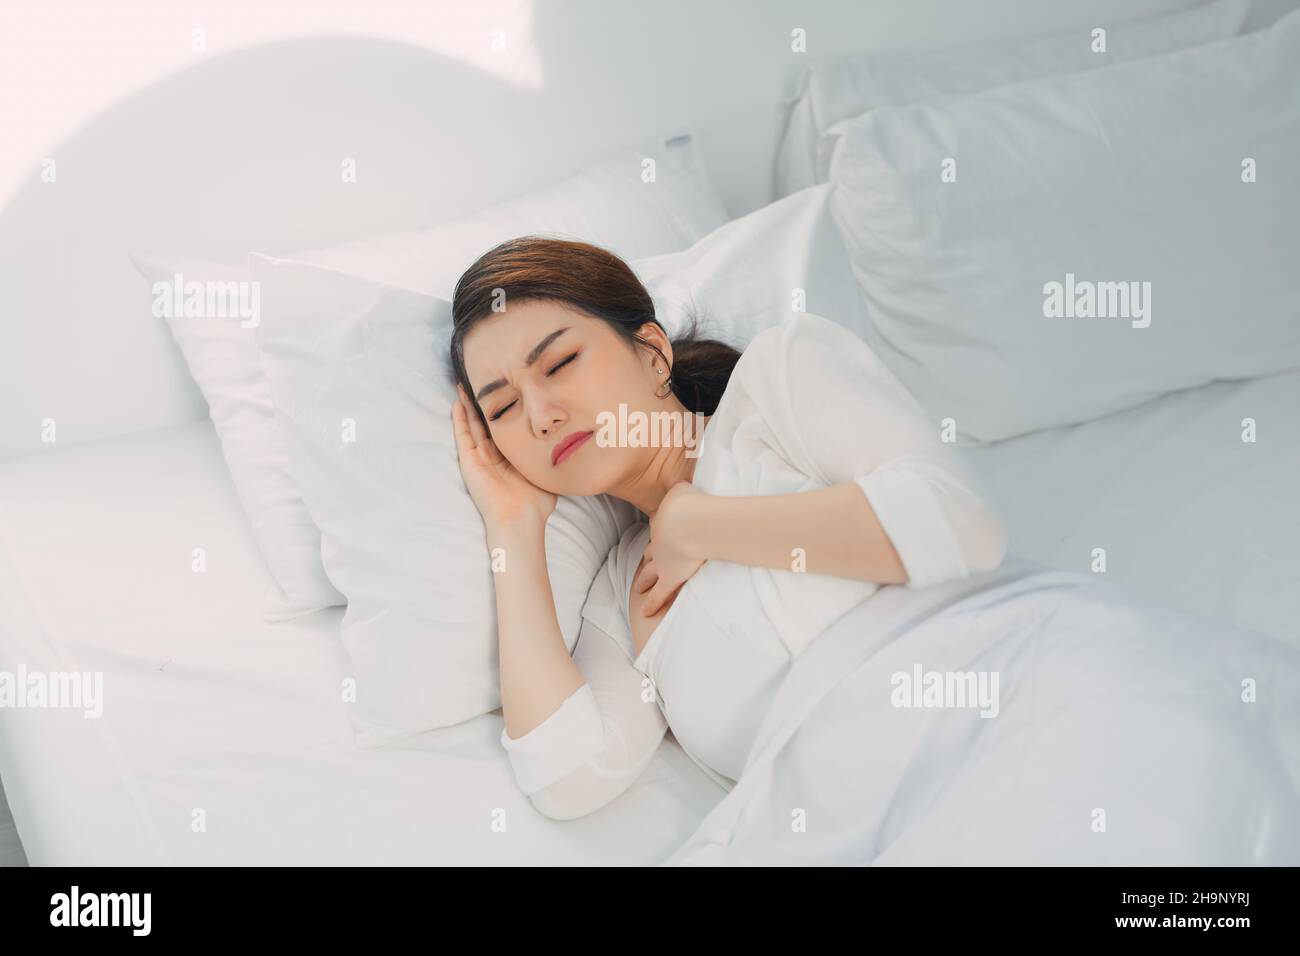 Sick woman suffering from running stuffy nose and sore throat. Stock Photo